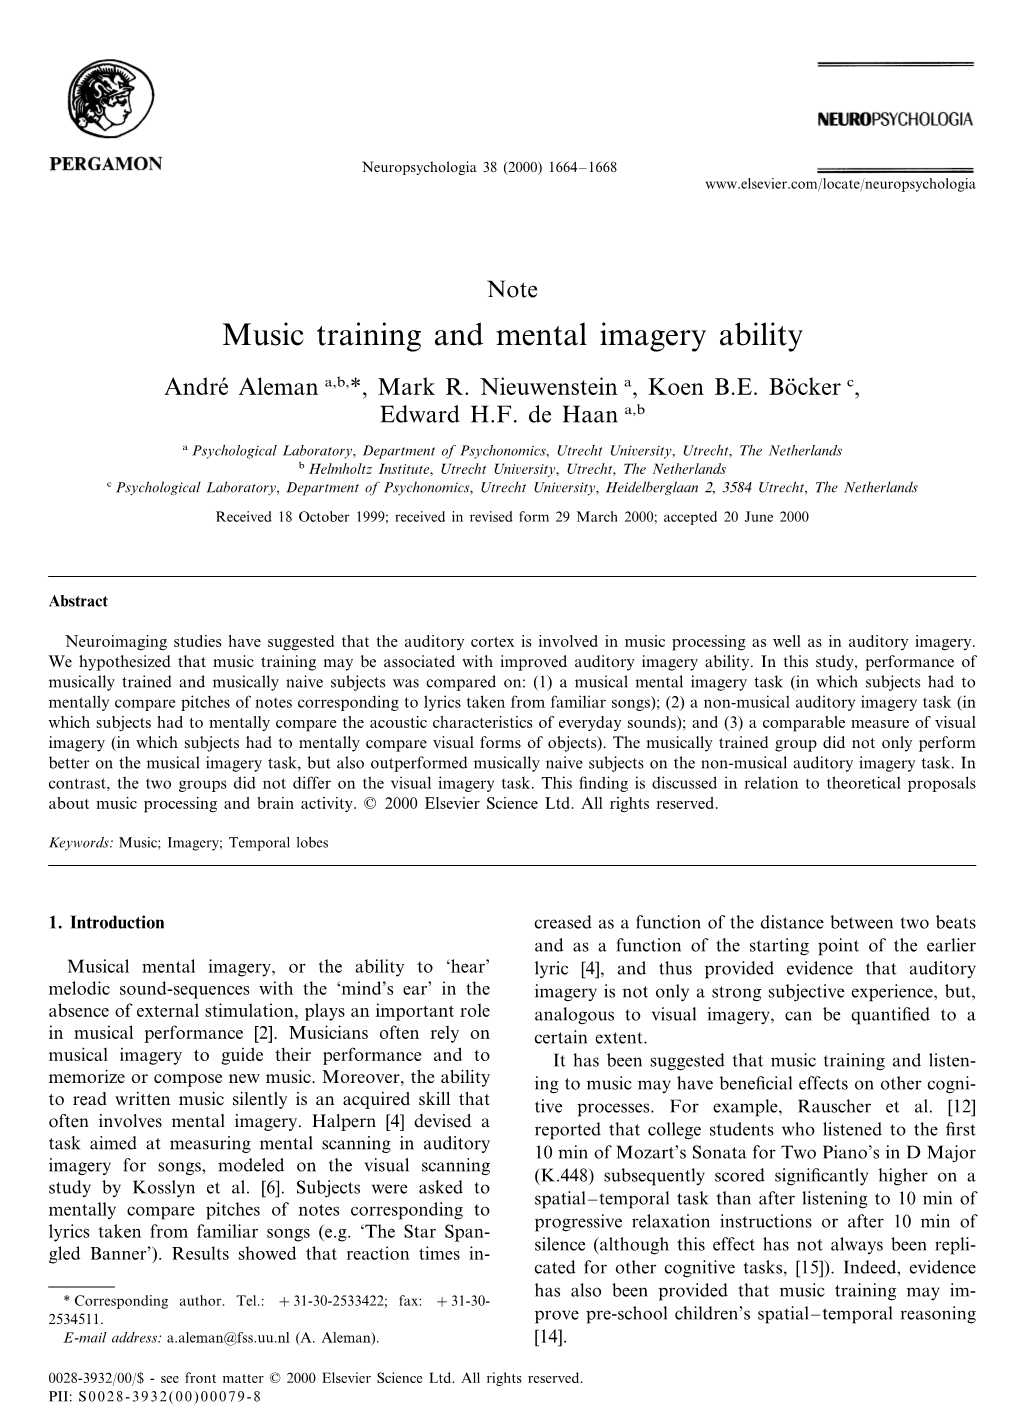 Music Training and Mental Imagery Ability